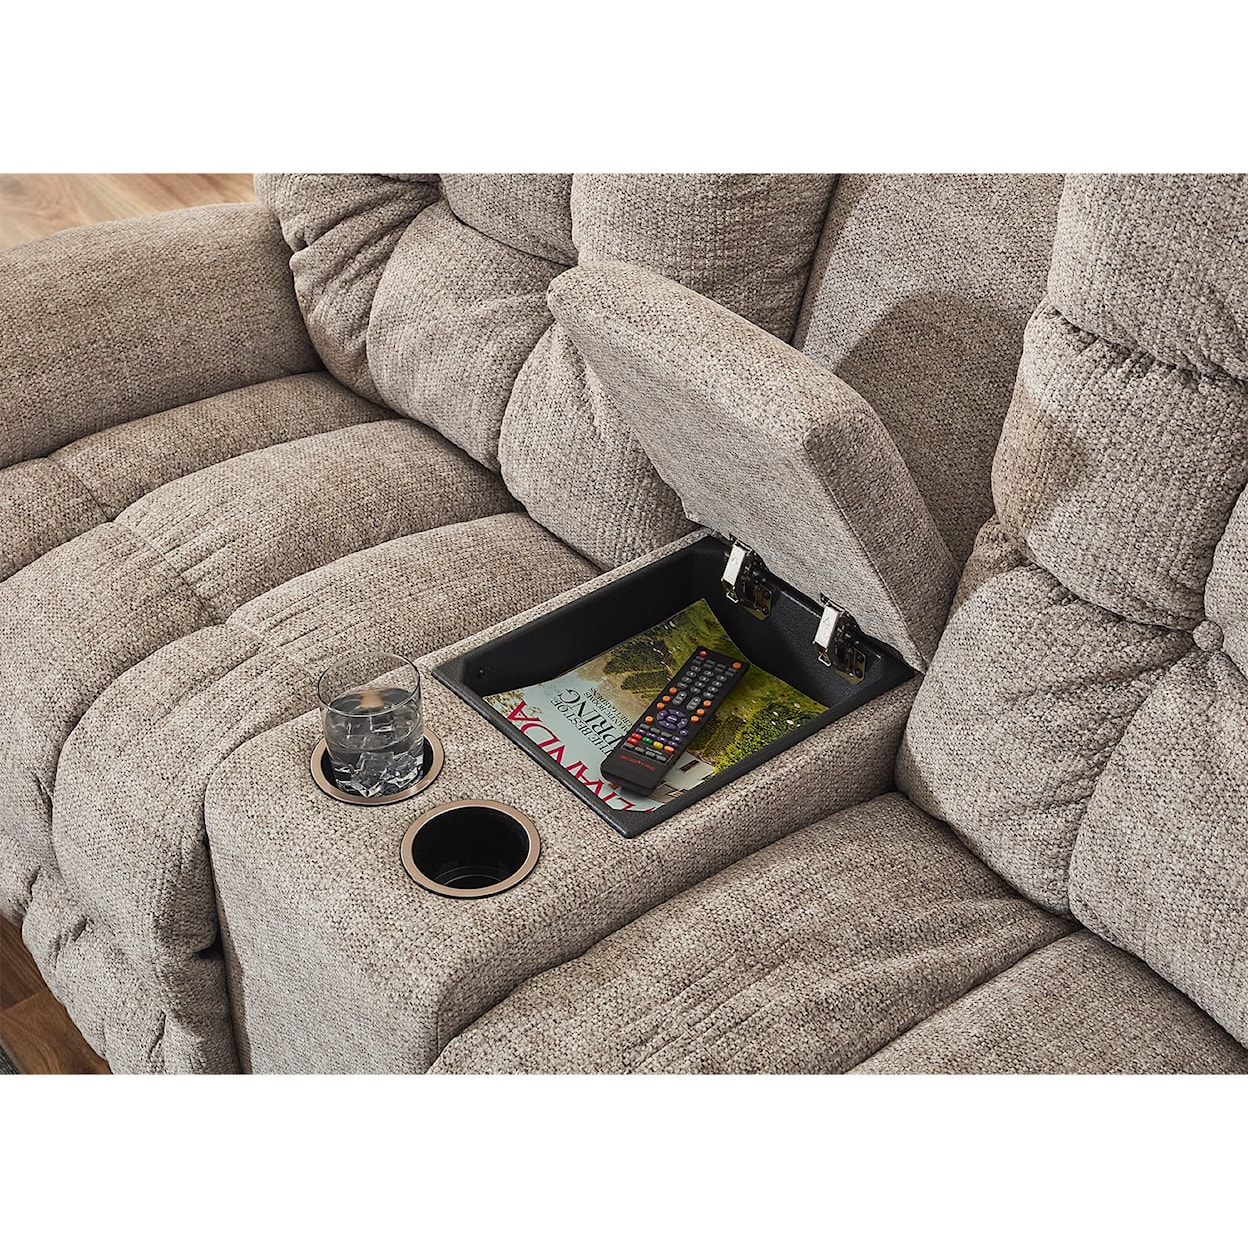 Best Home Furnishings Corey Power Space Saver Console Loveseat